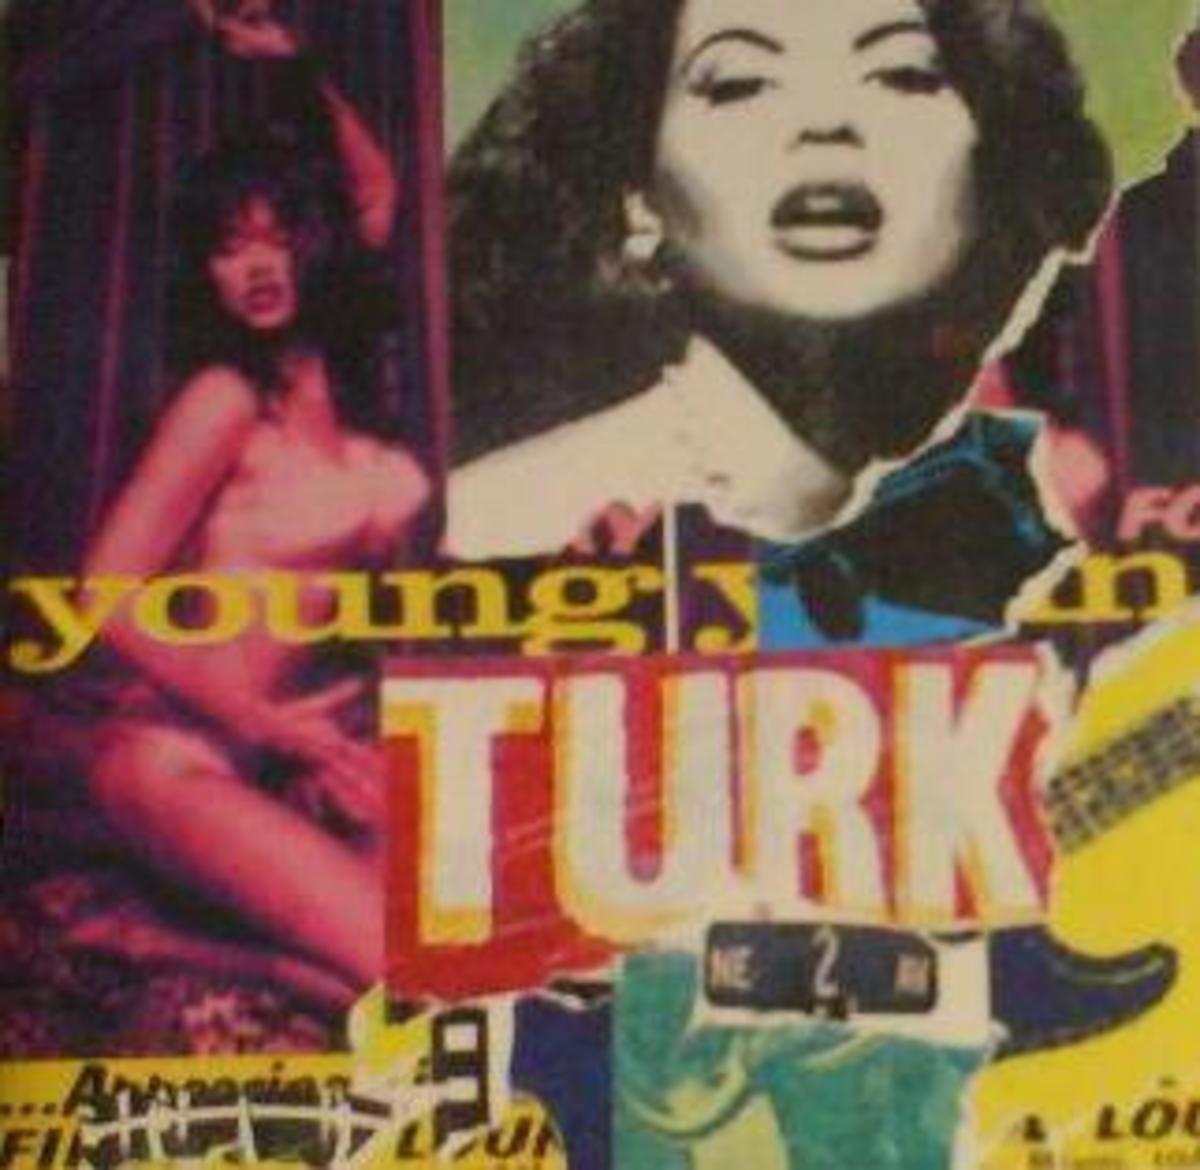 10-albums-you-need-to-hear--1-ne-2nd-ave-by-young-turk